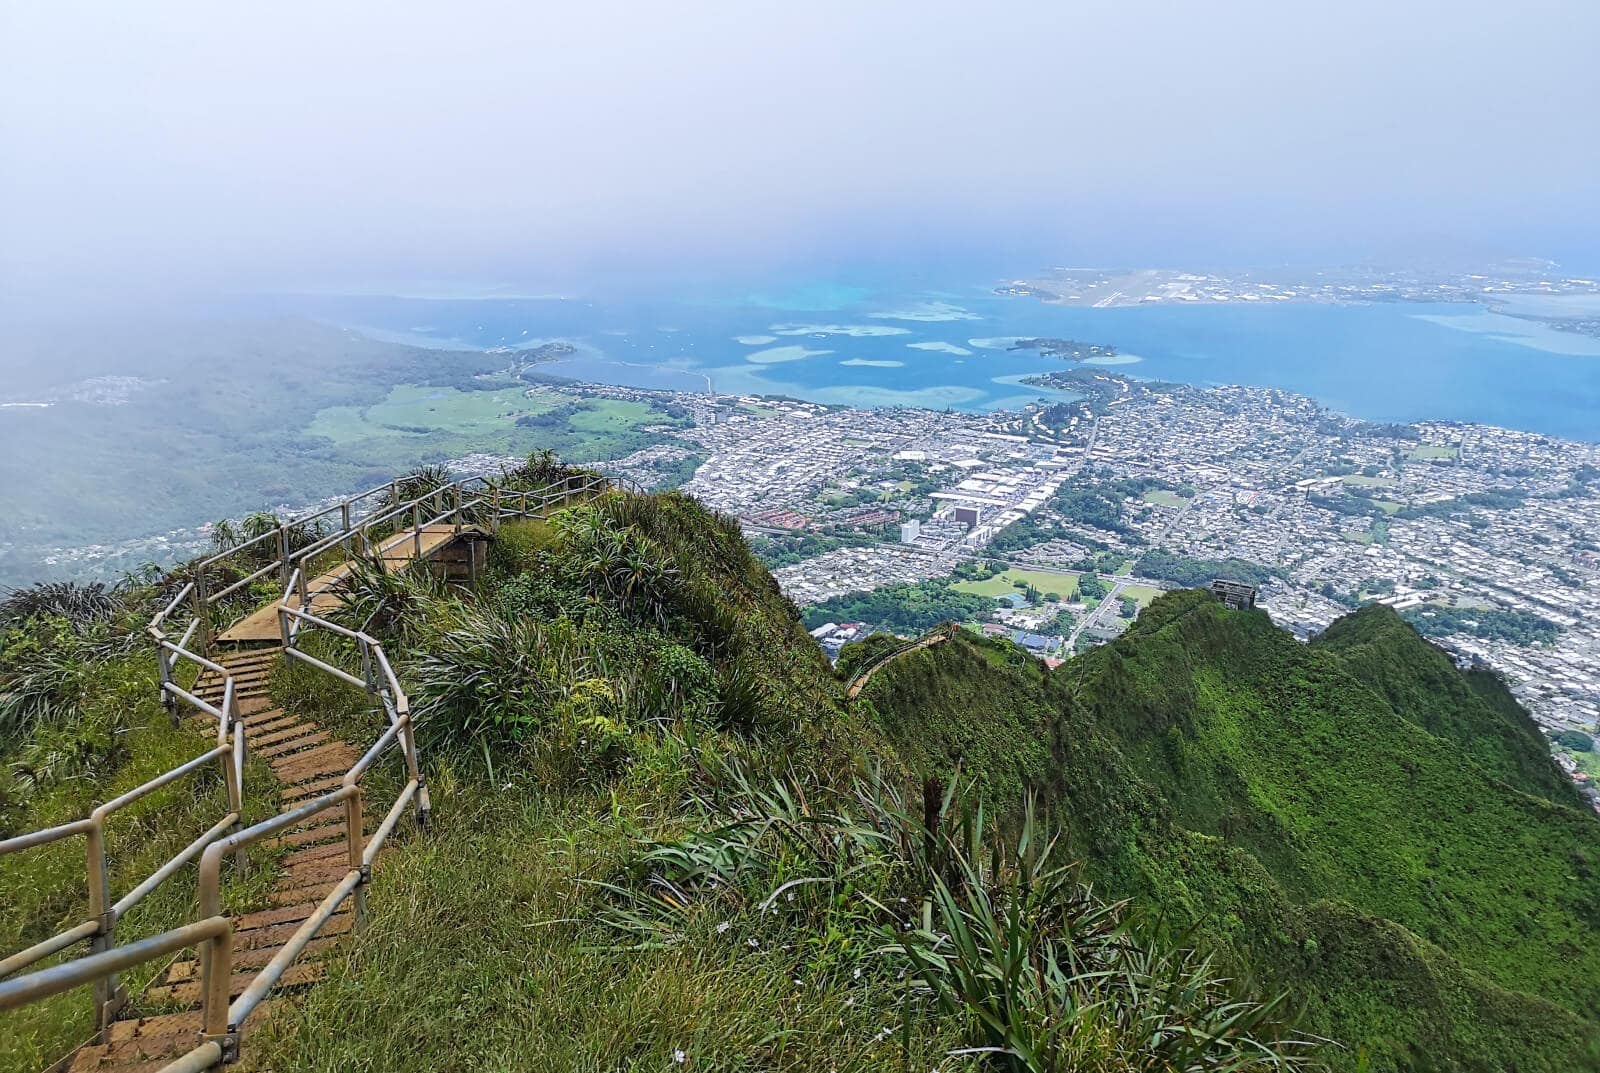 Travel bloggers reveal their most unforgettable travel experiences - Hiking the Stairway to Heaven on Oahu, Hawaii (the legal way)